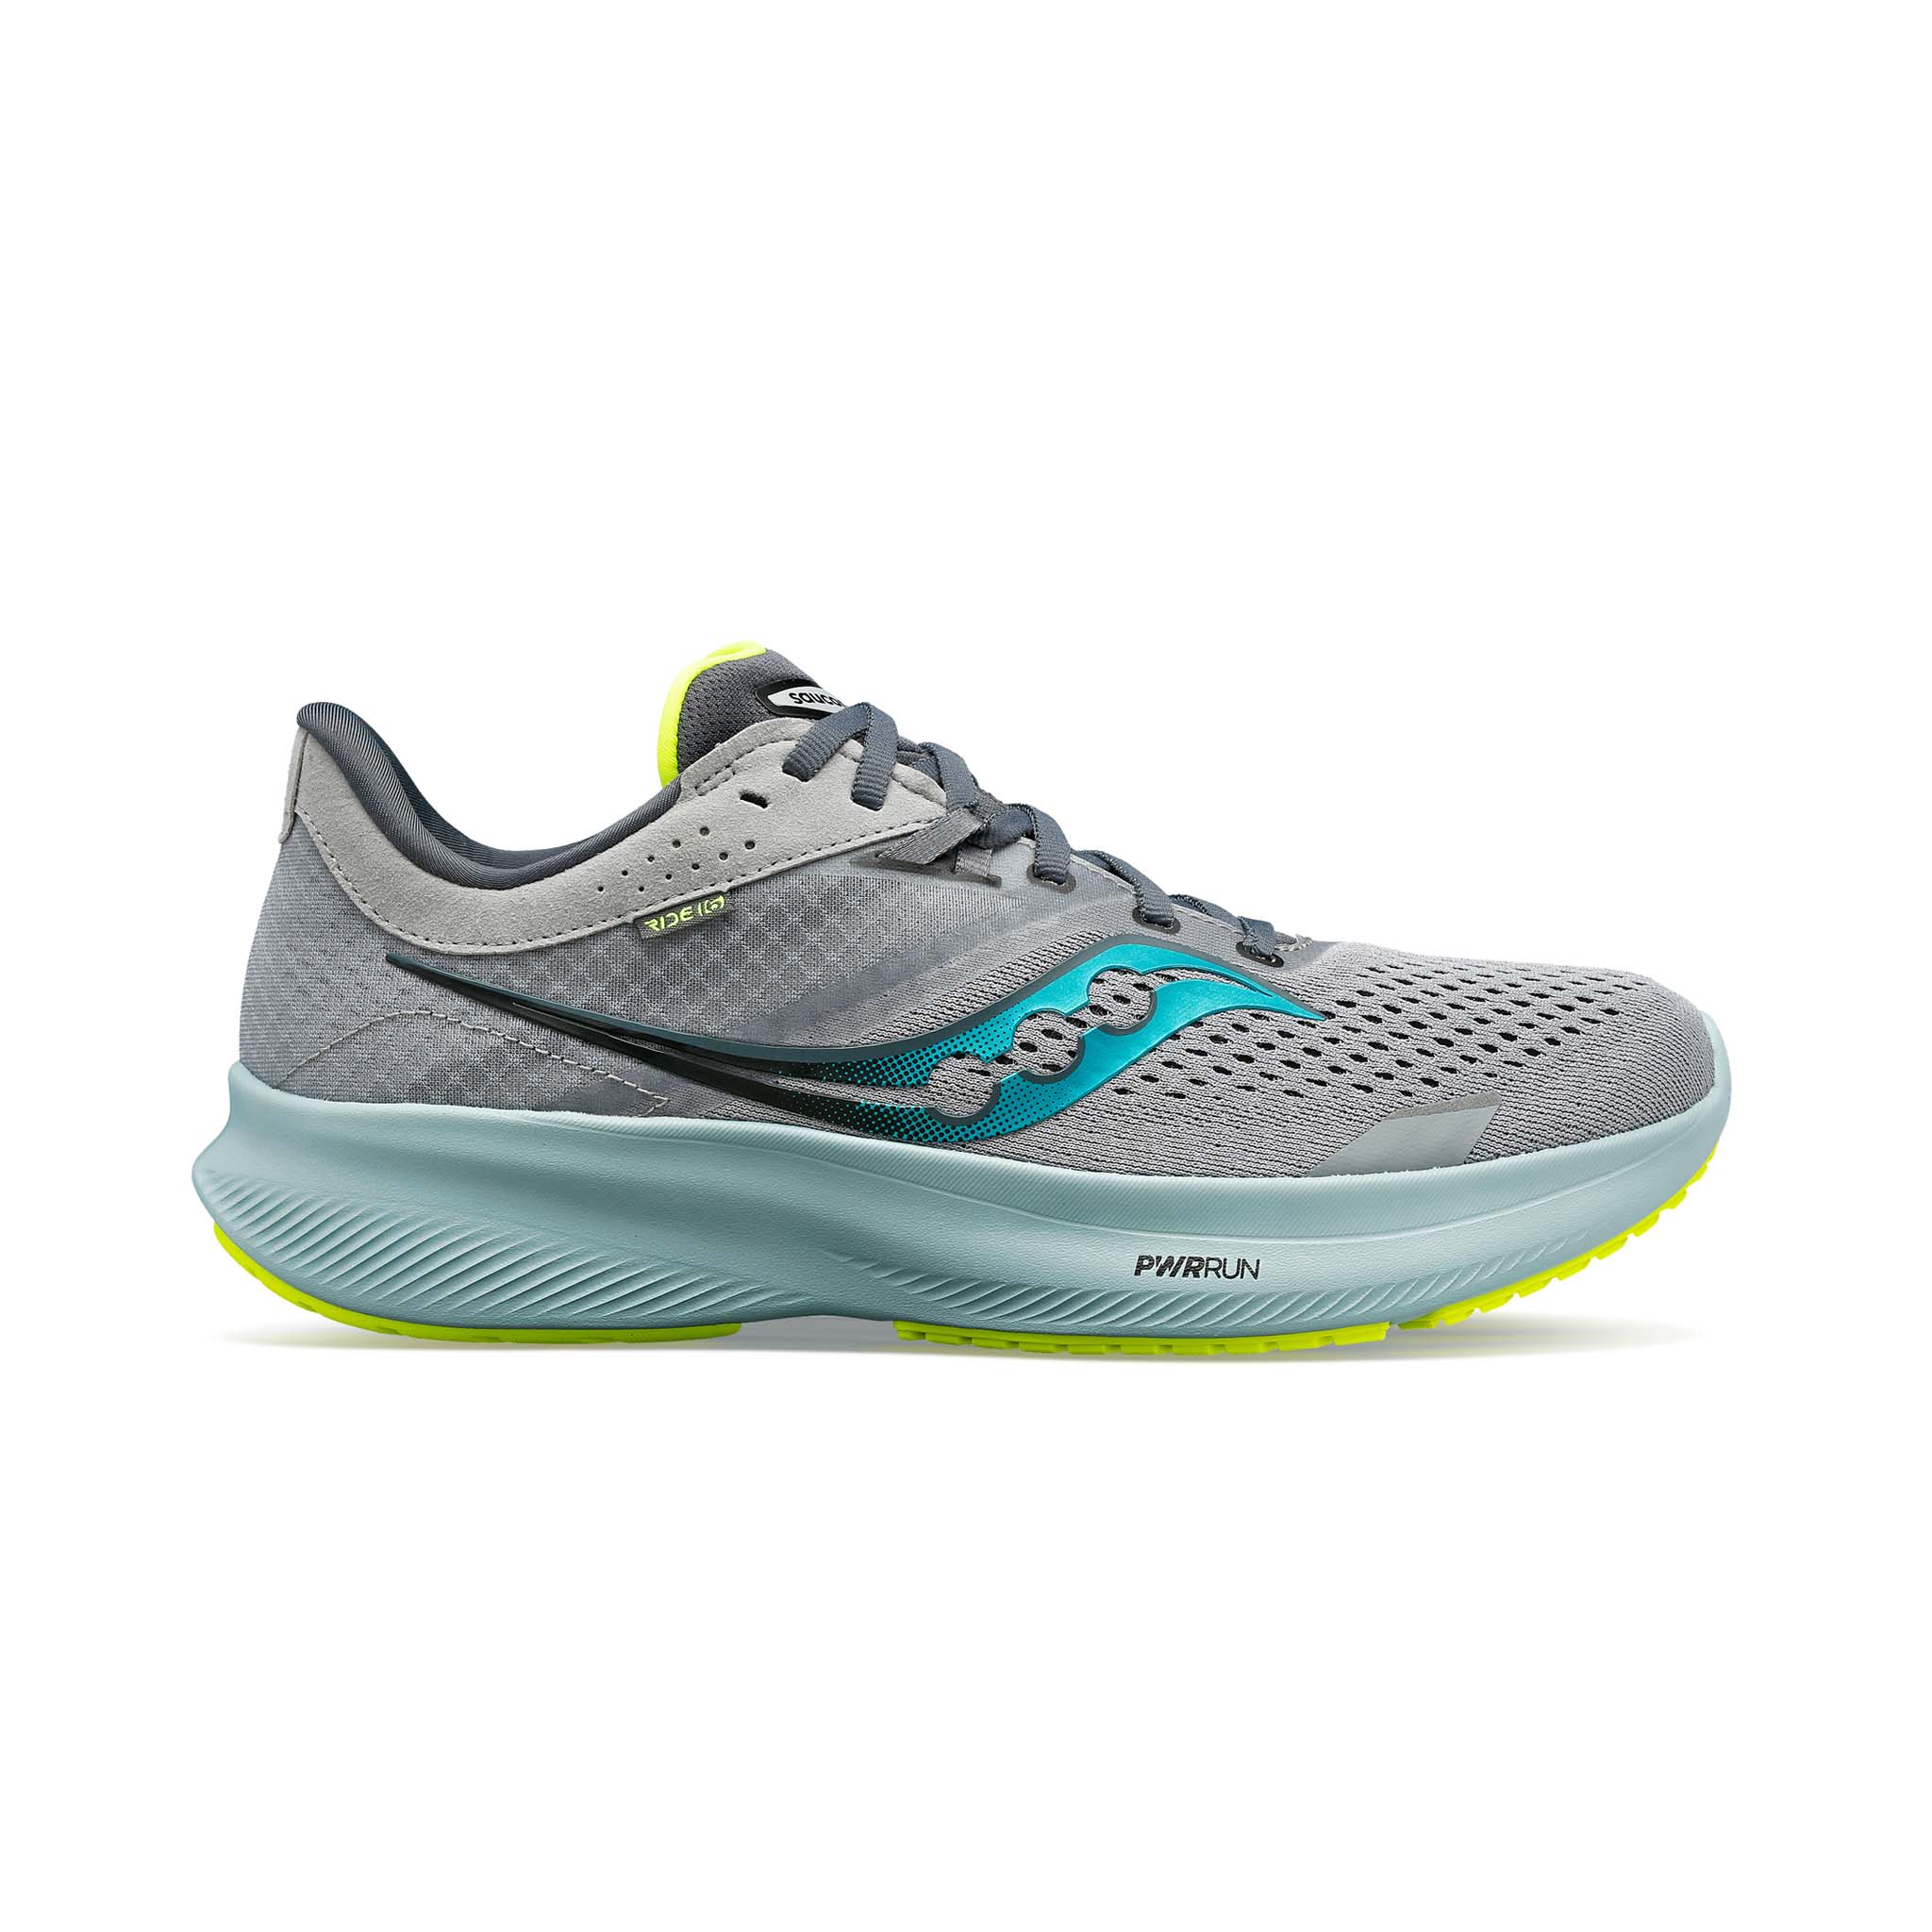 Saucony Men's Ride 16 Road Running Shoes - Fossil | Run4It